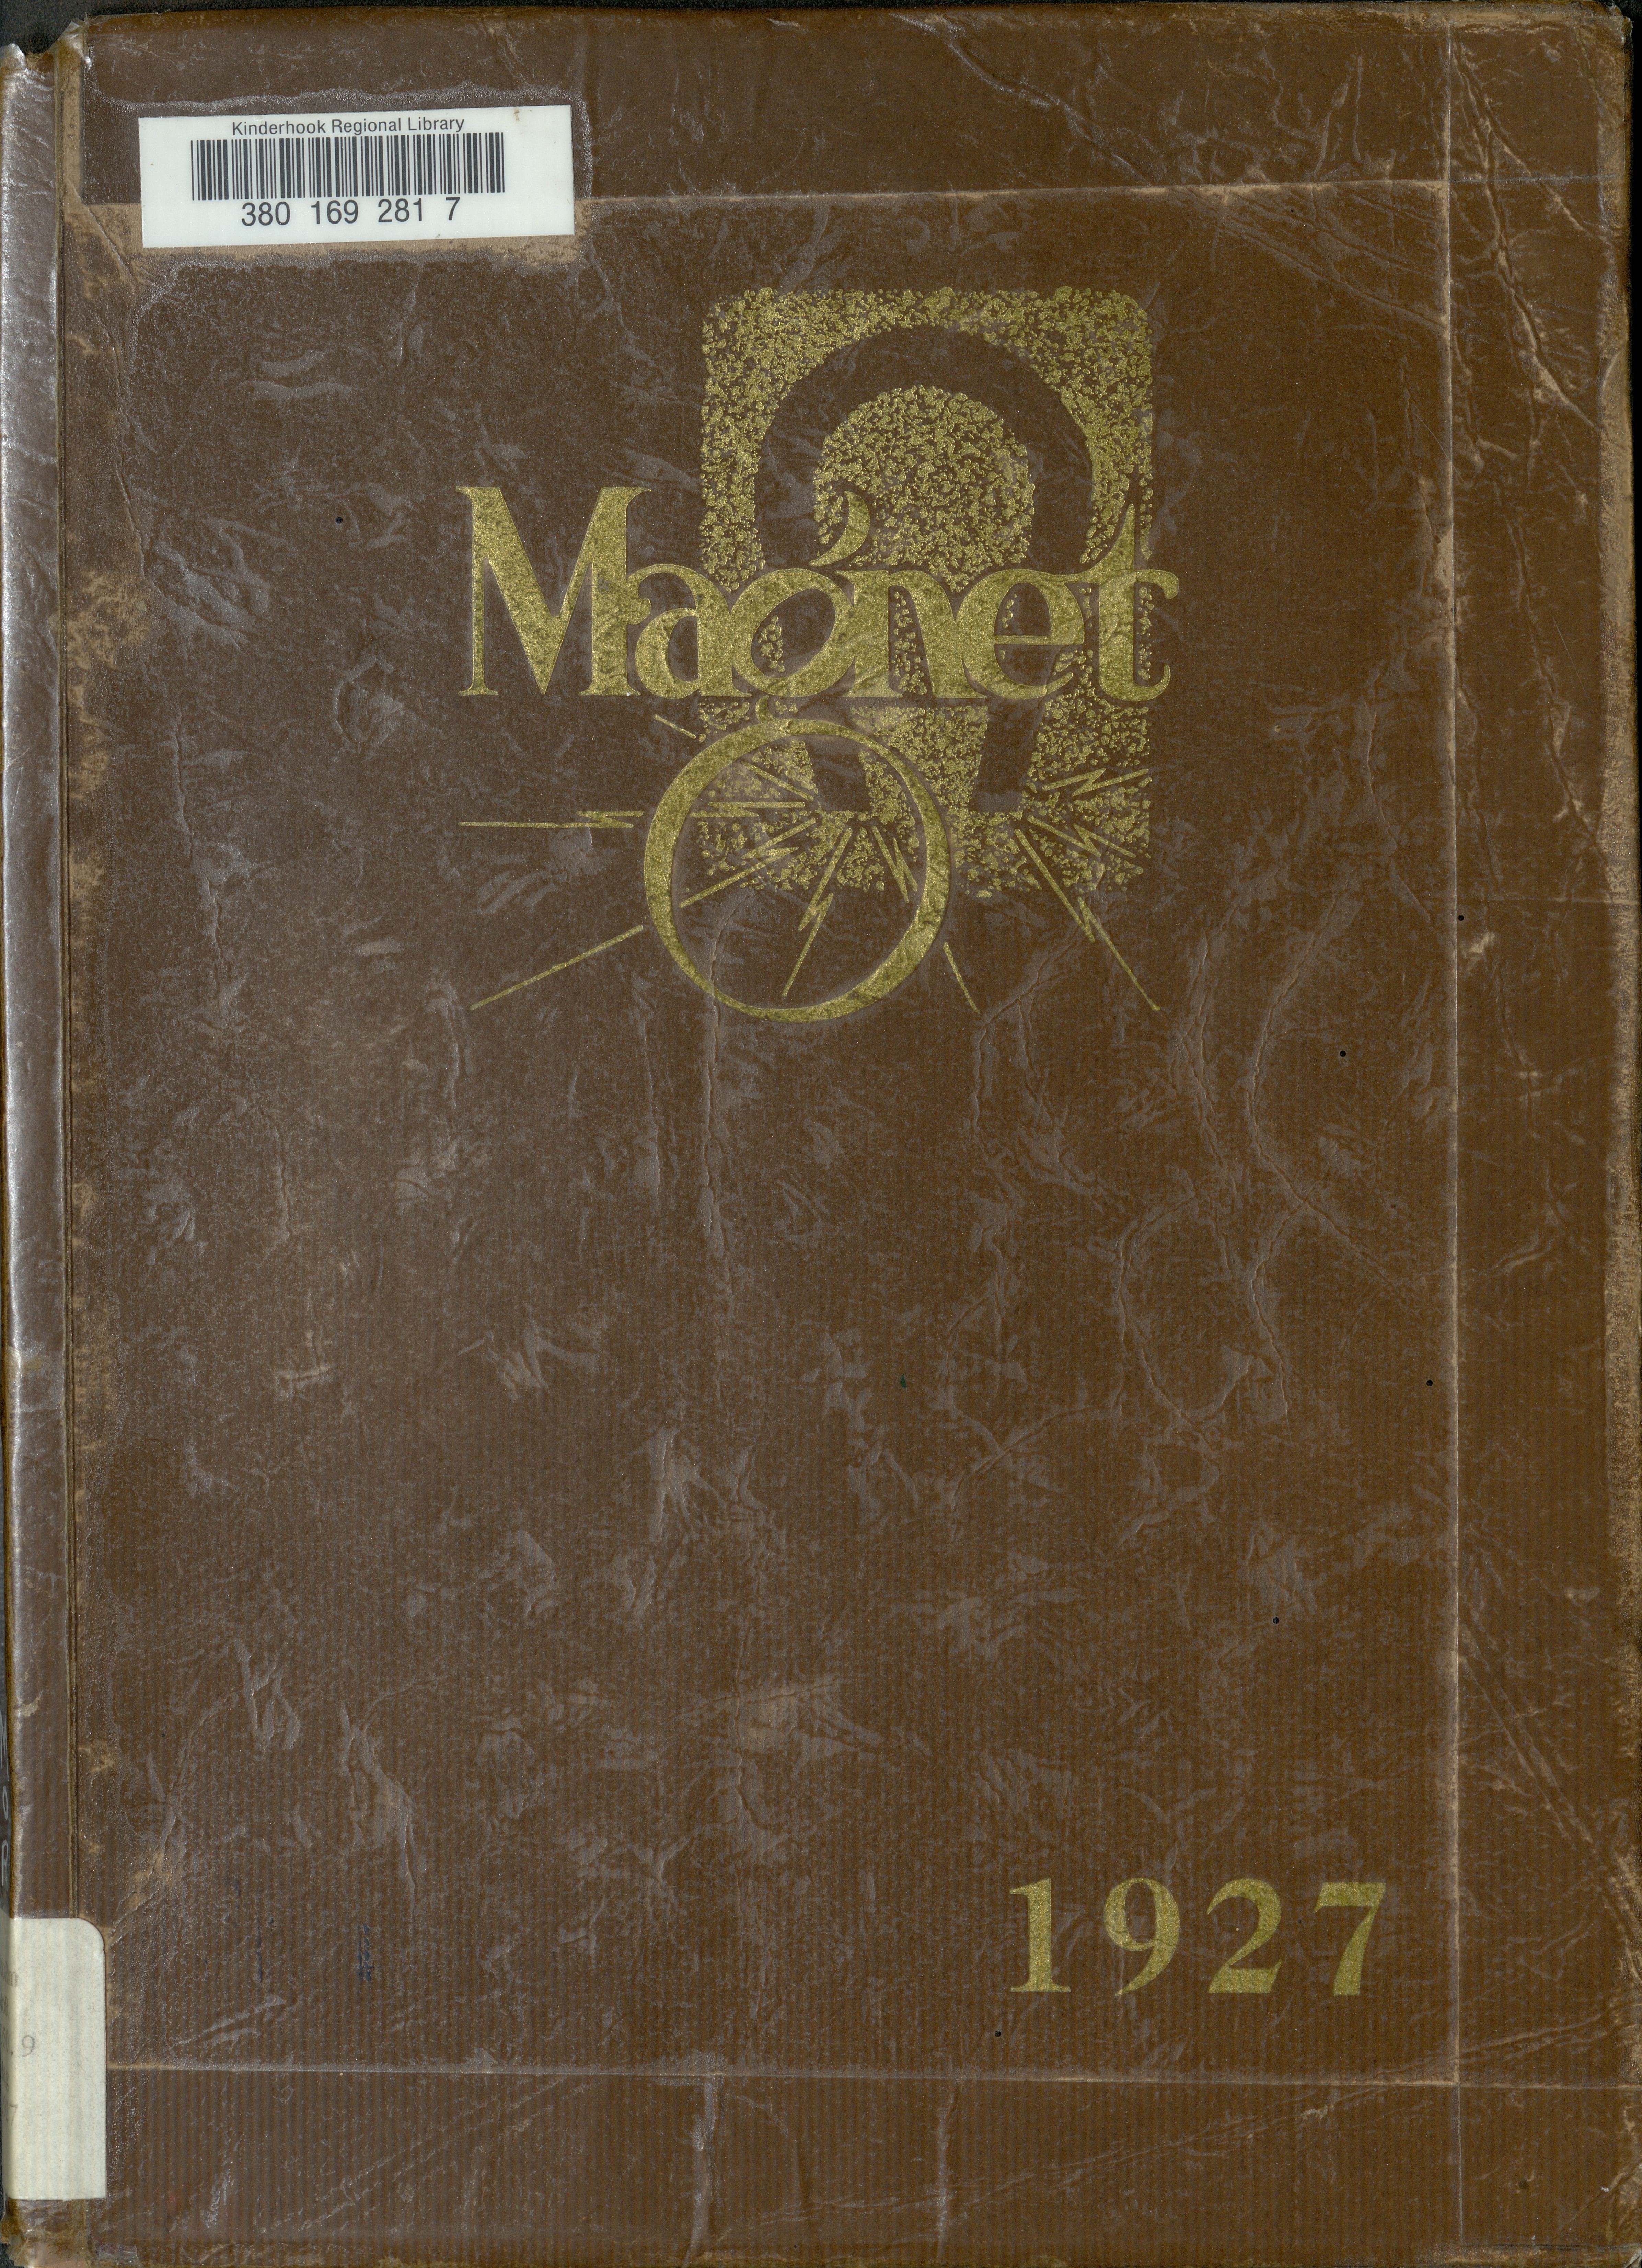 1927 Magnet Page Cover.jpg